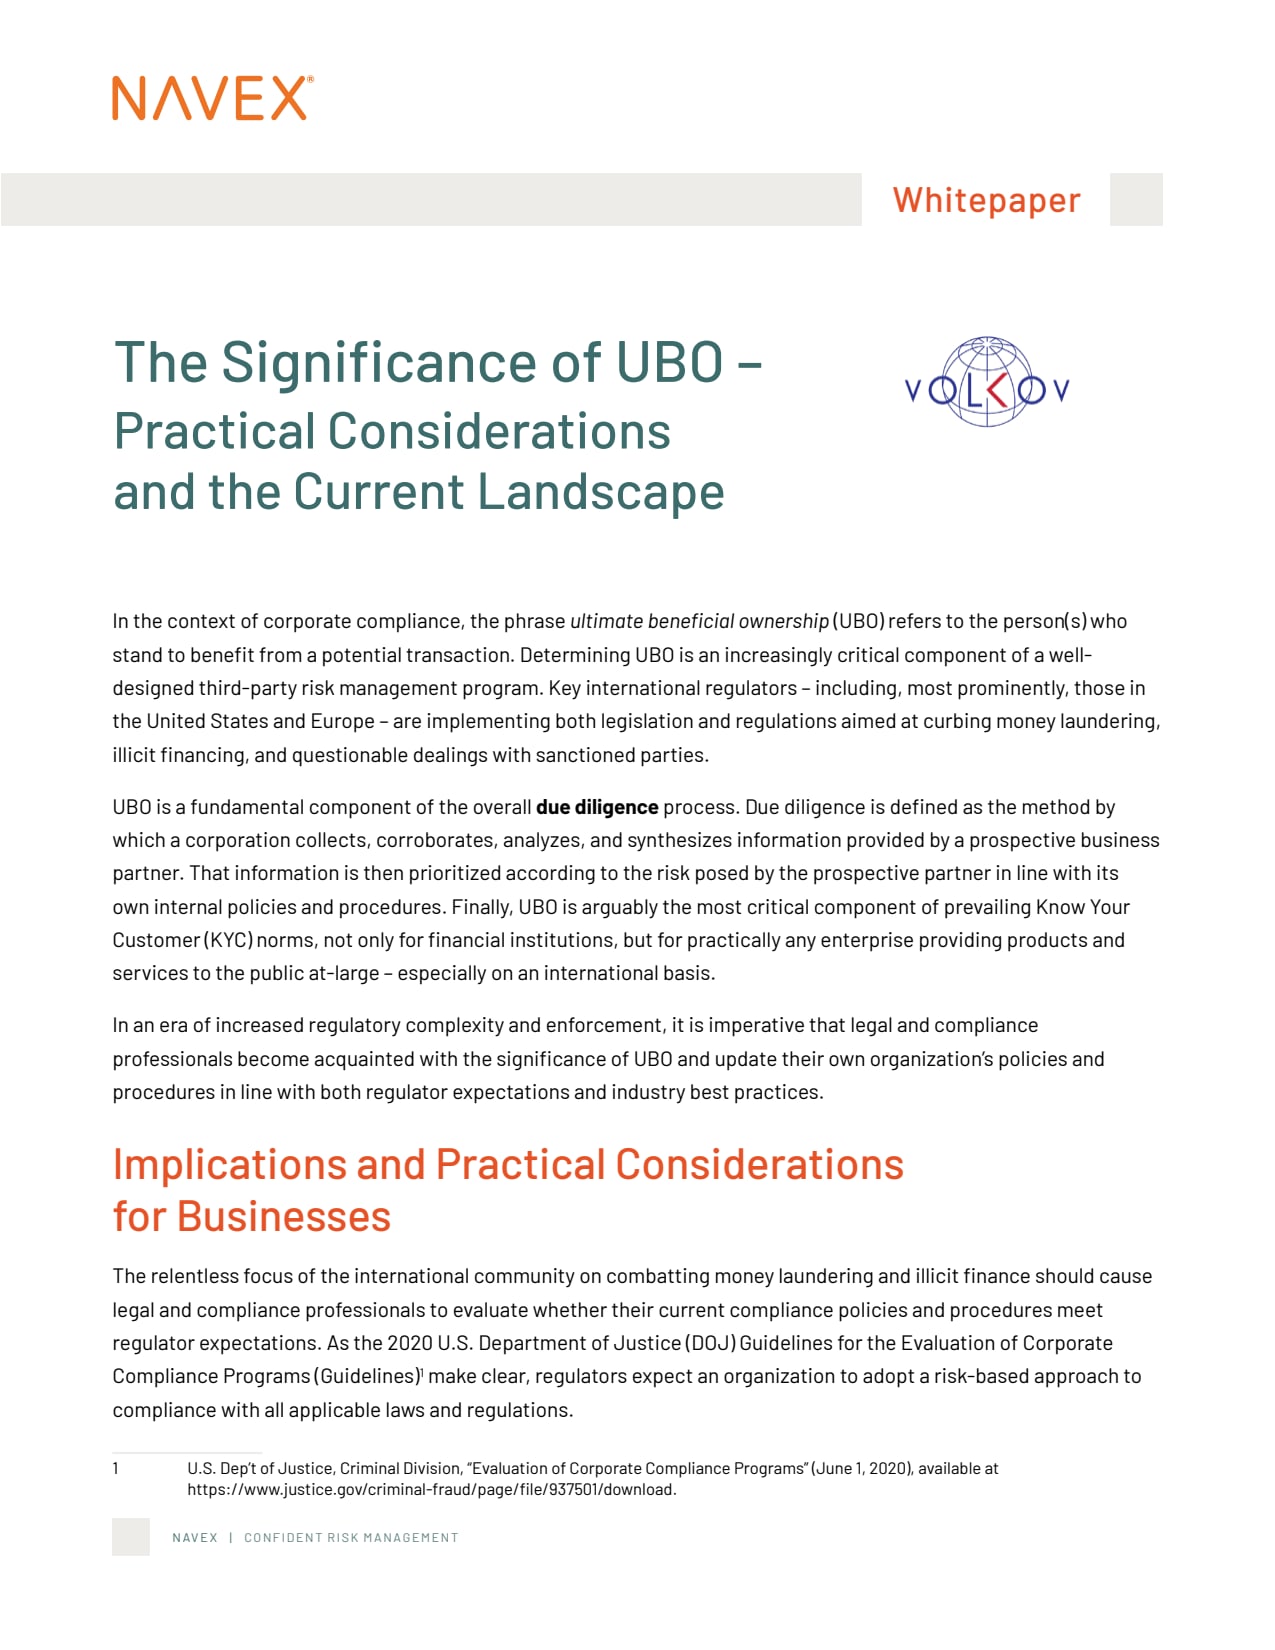 The Significance of UBO Whitepaper